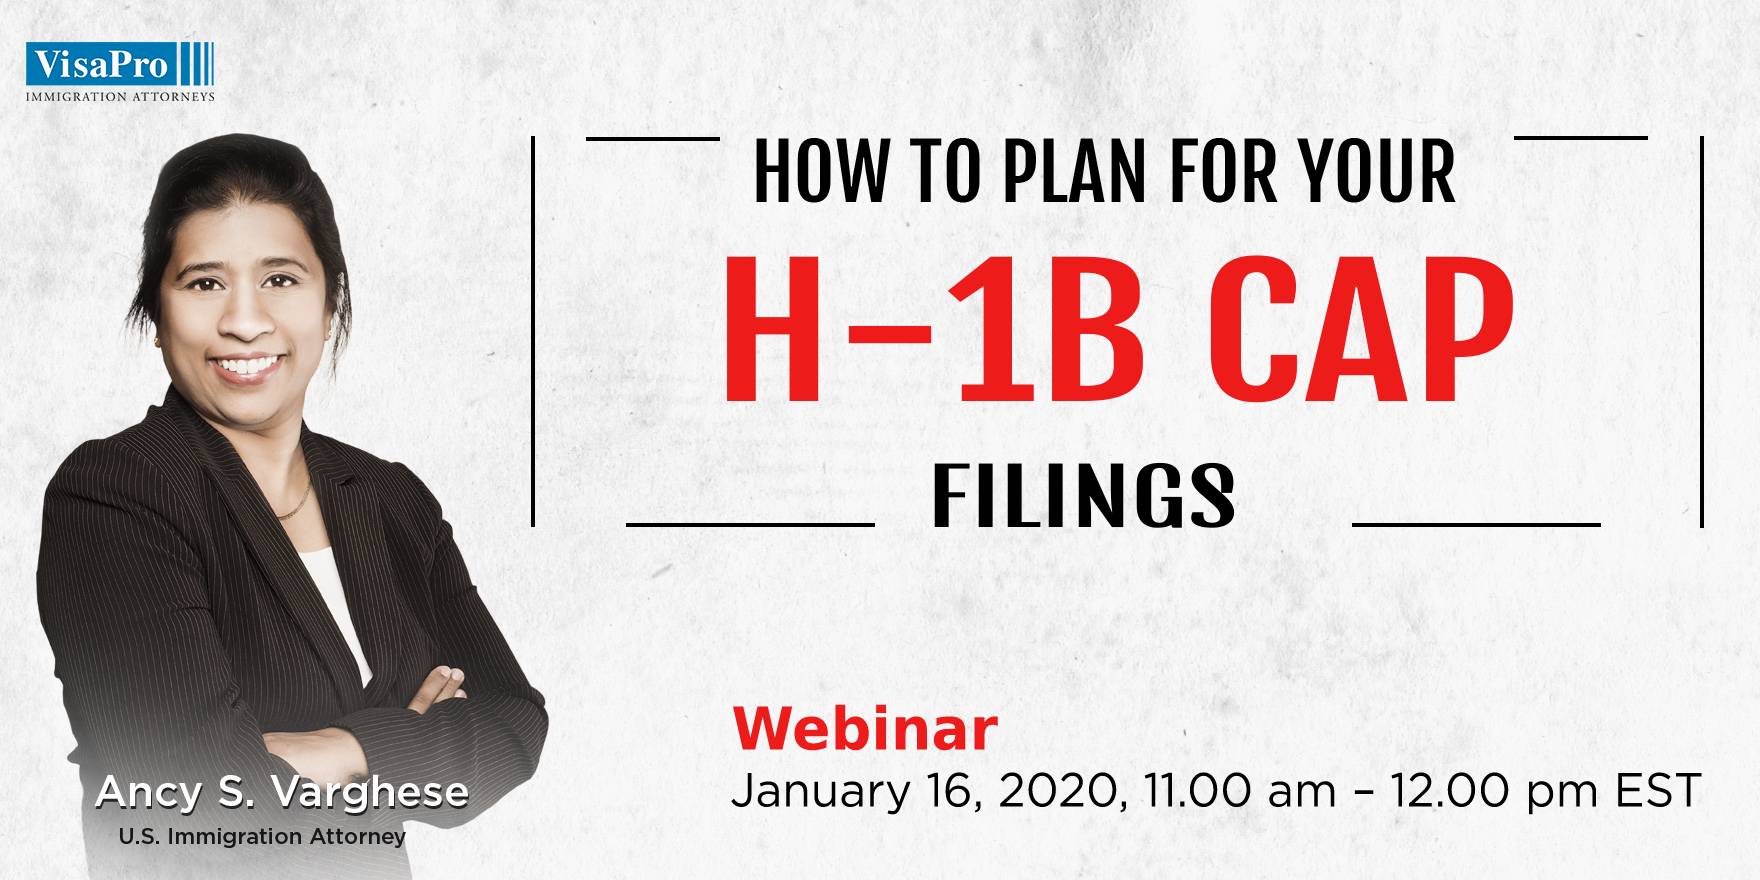 How To Properly Plan For Your H-1B Cap 2020 Filings?, New Orleans, Louisiana, United States